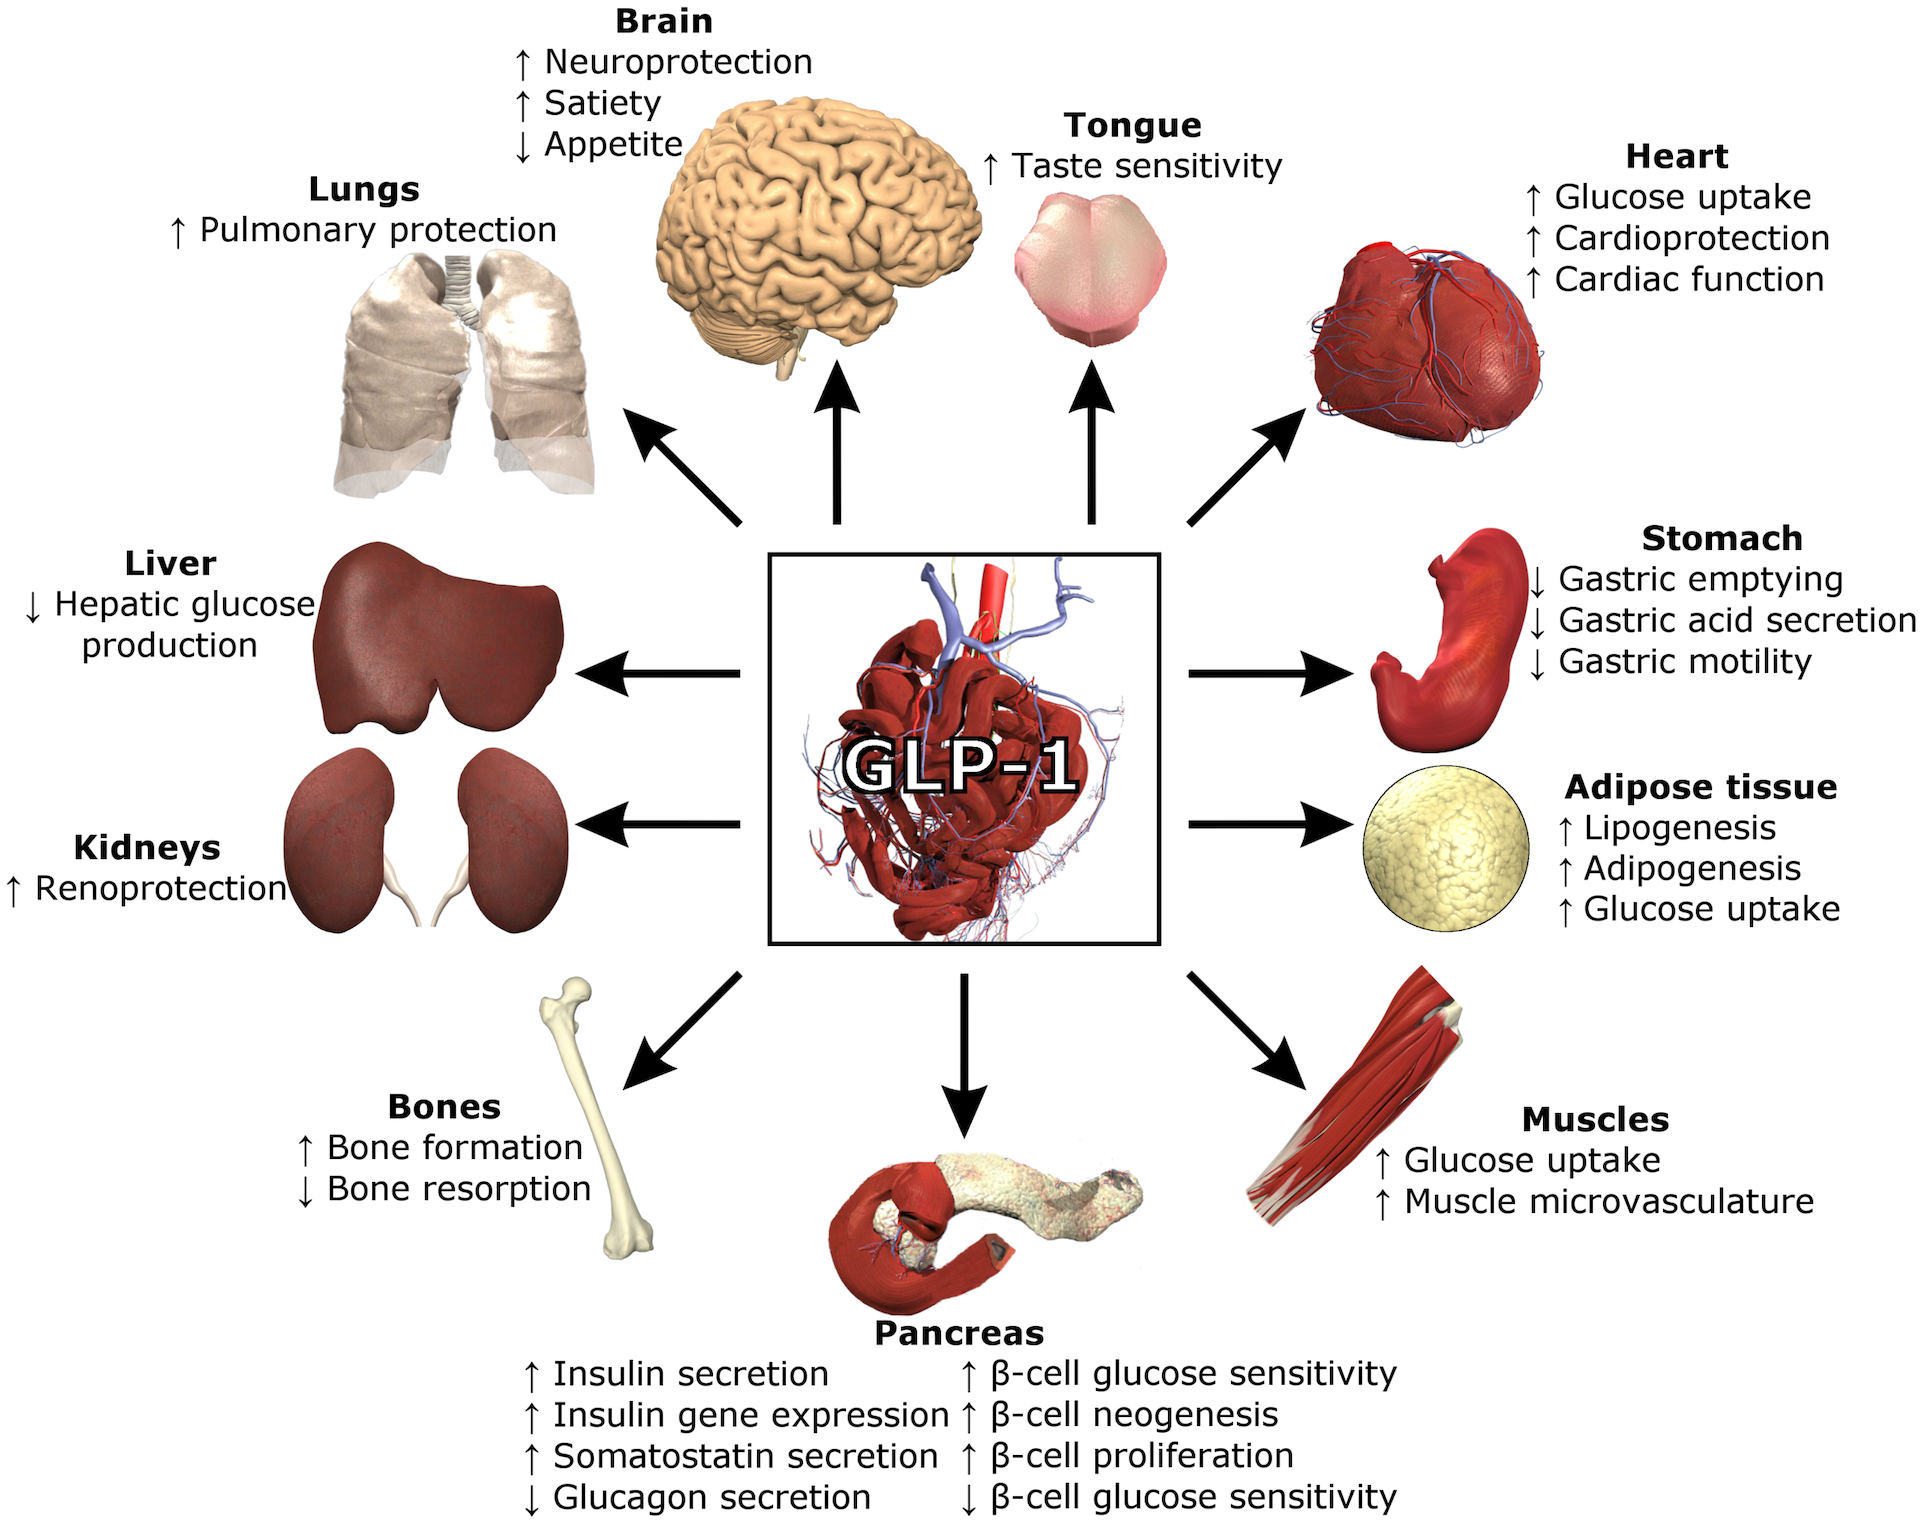 Diagram showing the effects of GLP-1 on various organs of the body